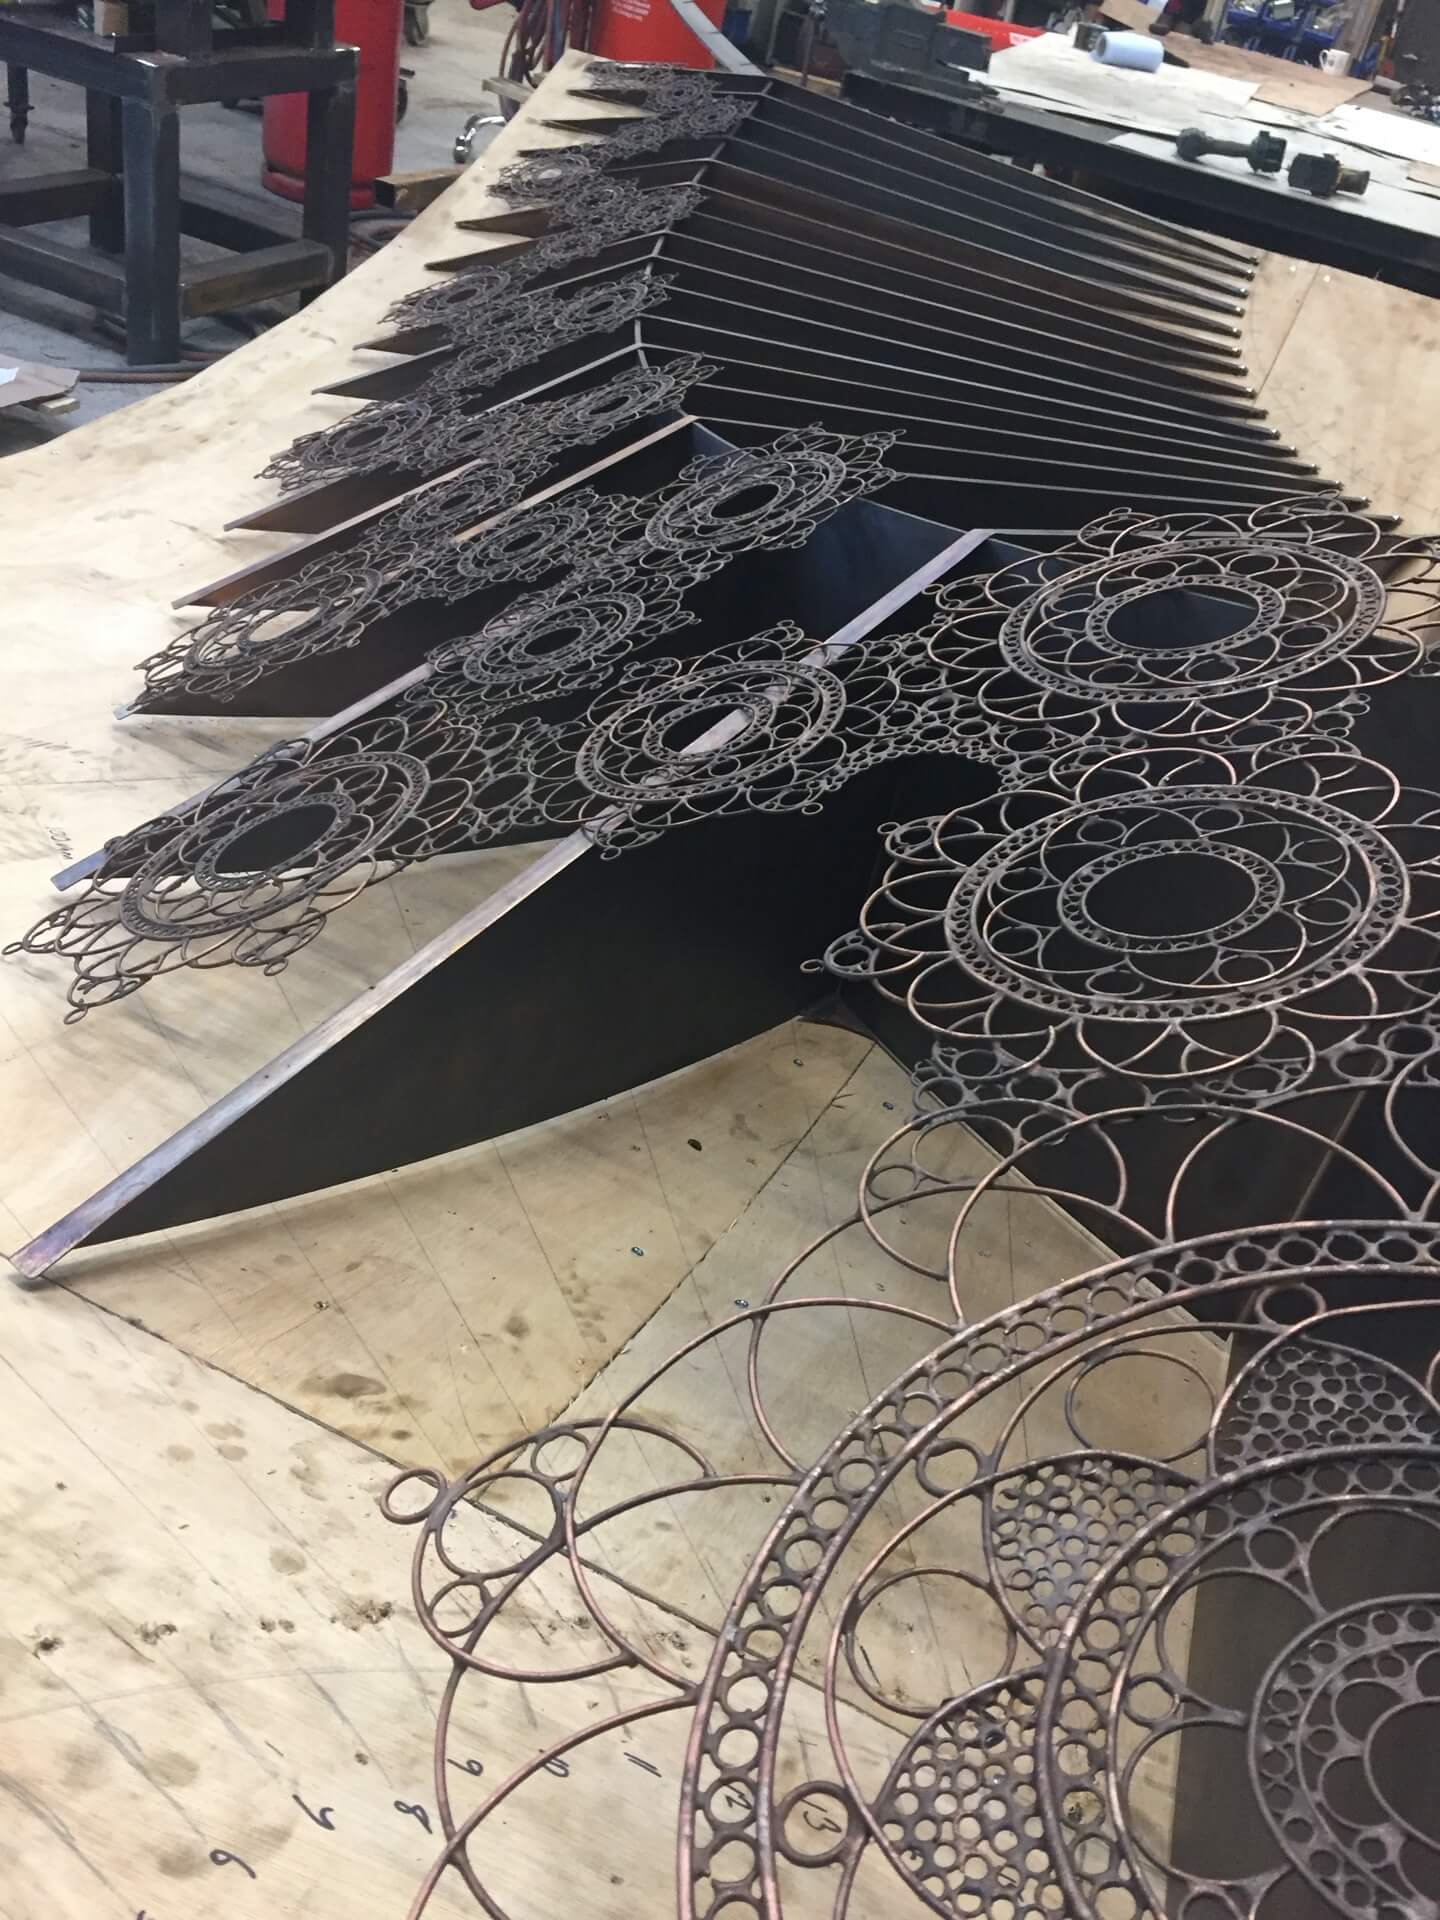 Sculpture in metal of lace fans by Yasemen Hussein at Clarges, London